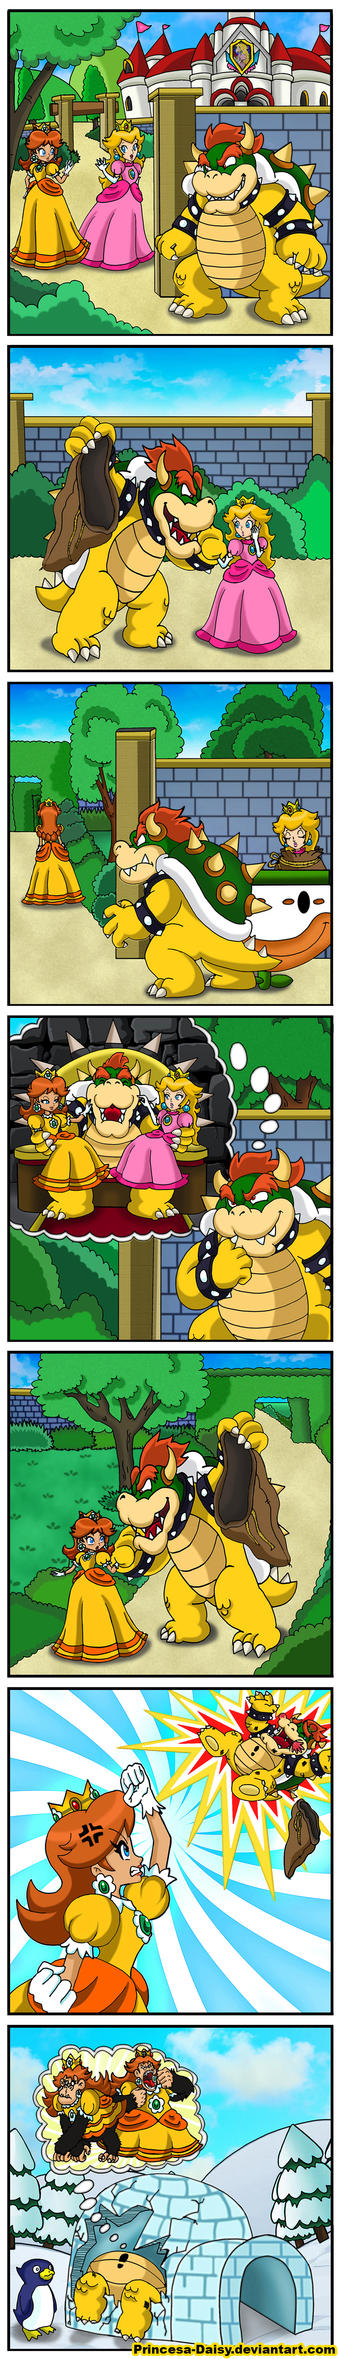 bowser_s_ambition_by_princesa_daisy-d9h4